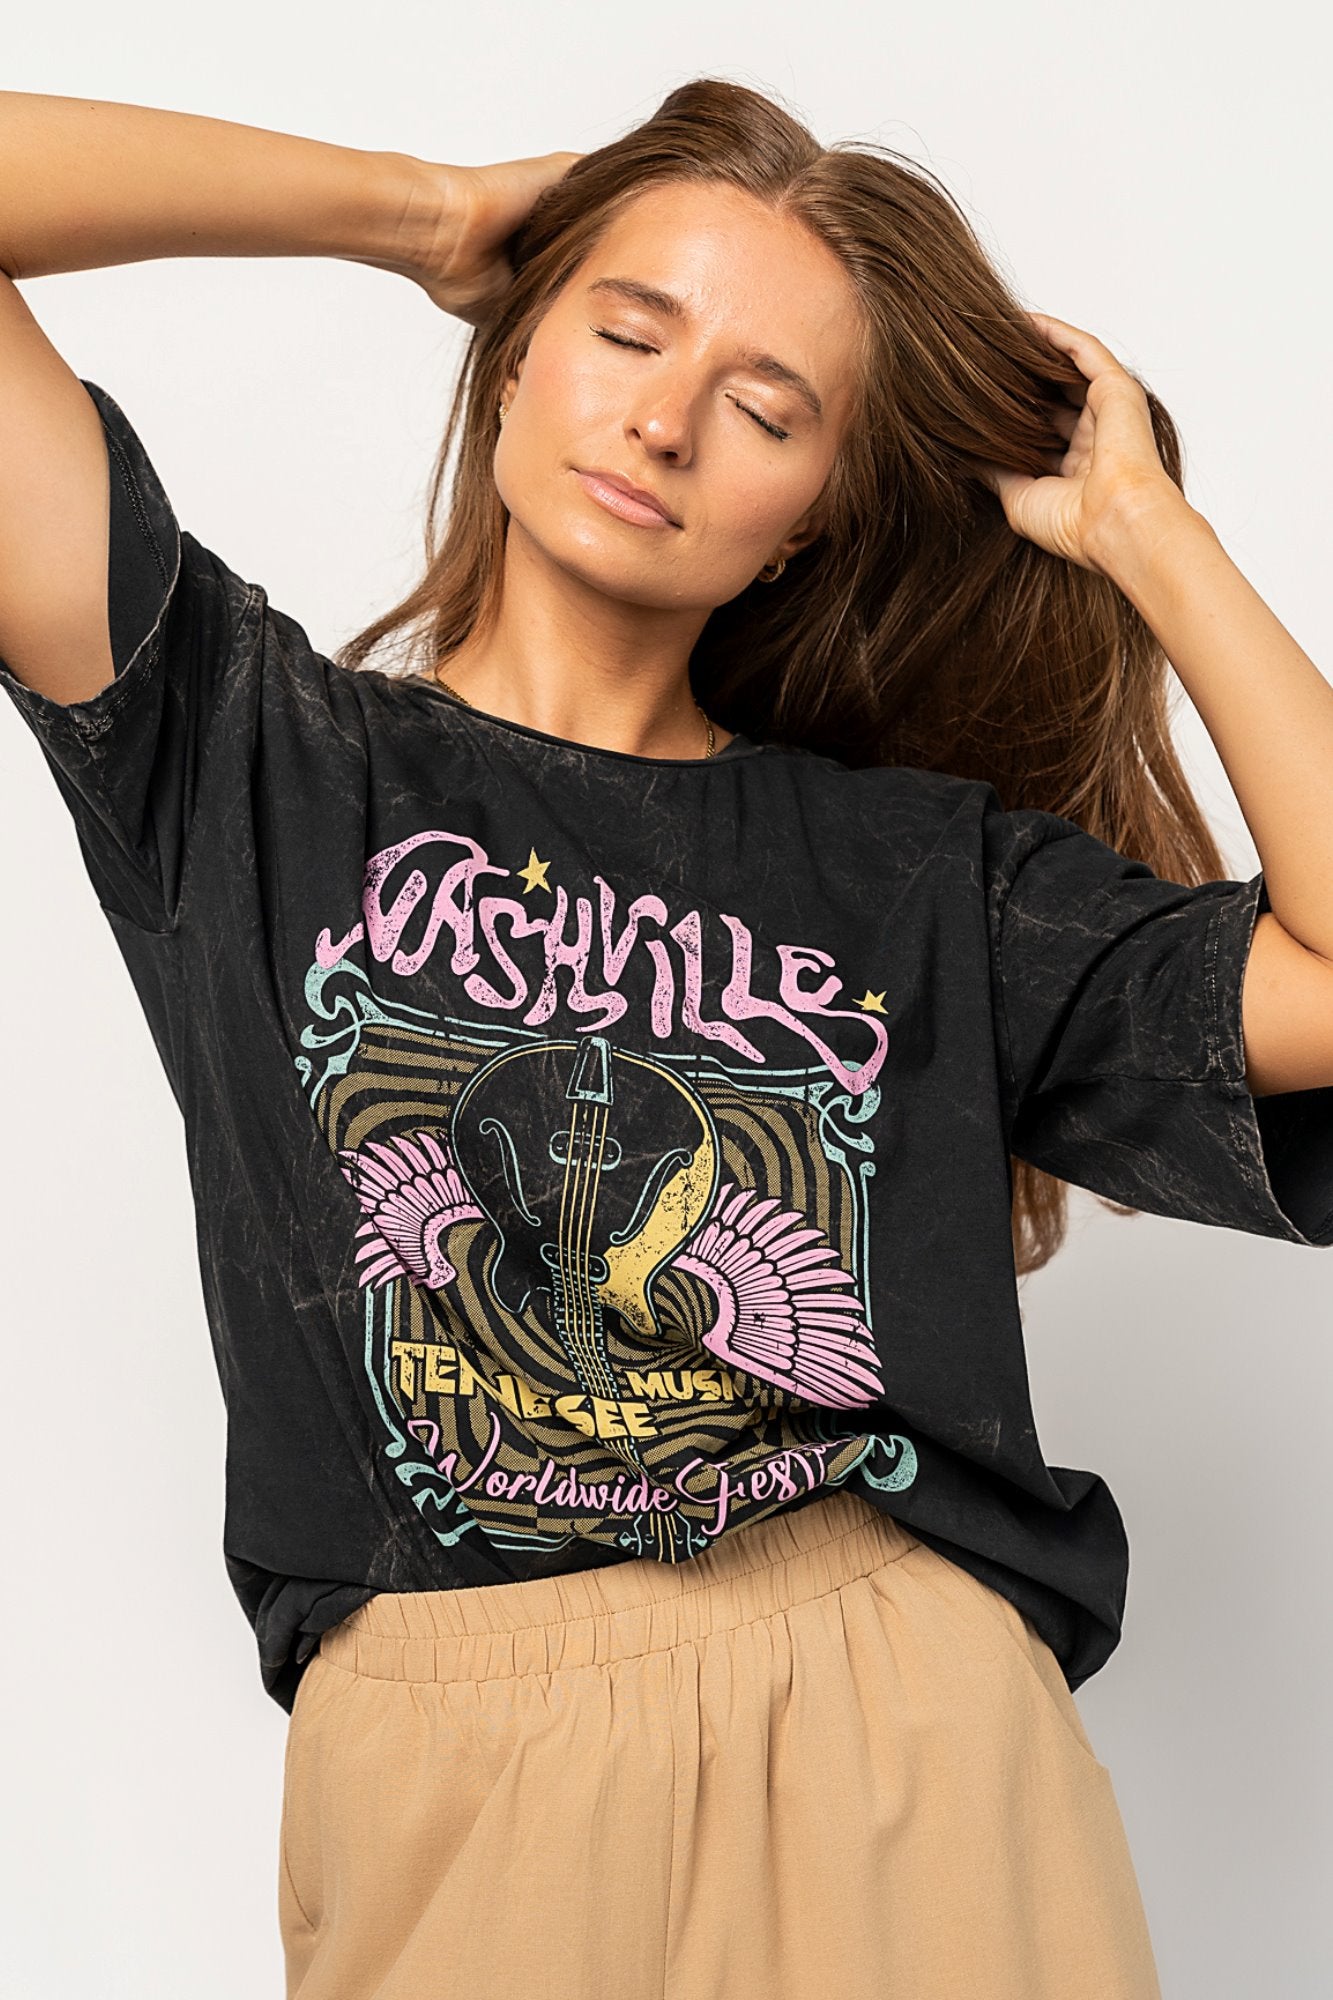 Nashville Tennesee Graphic Tee (Small-XL) Holley Girl 